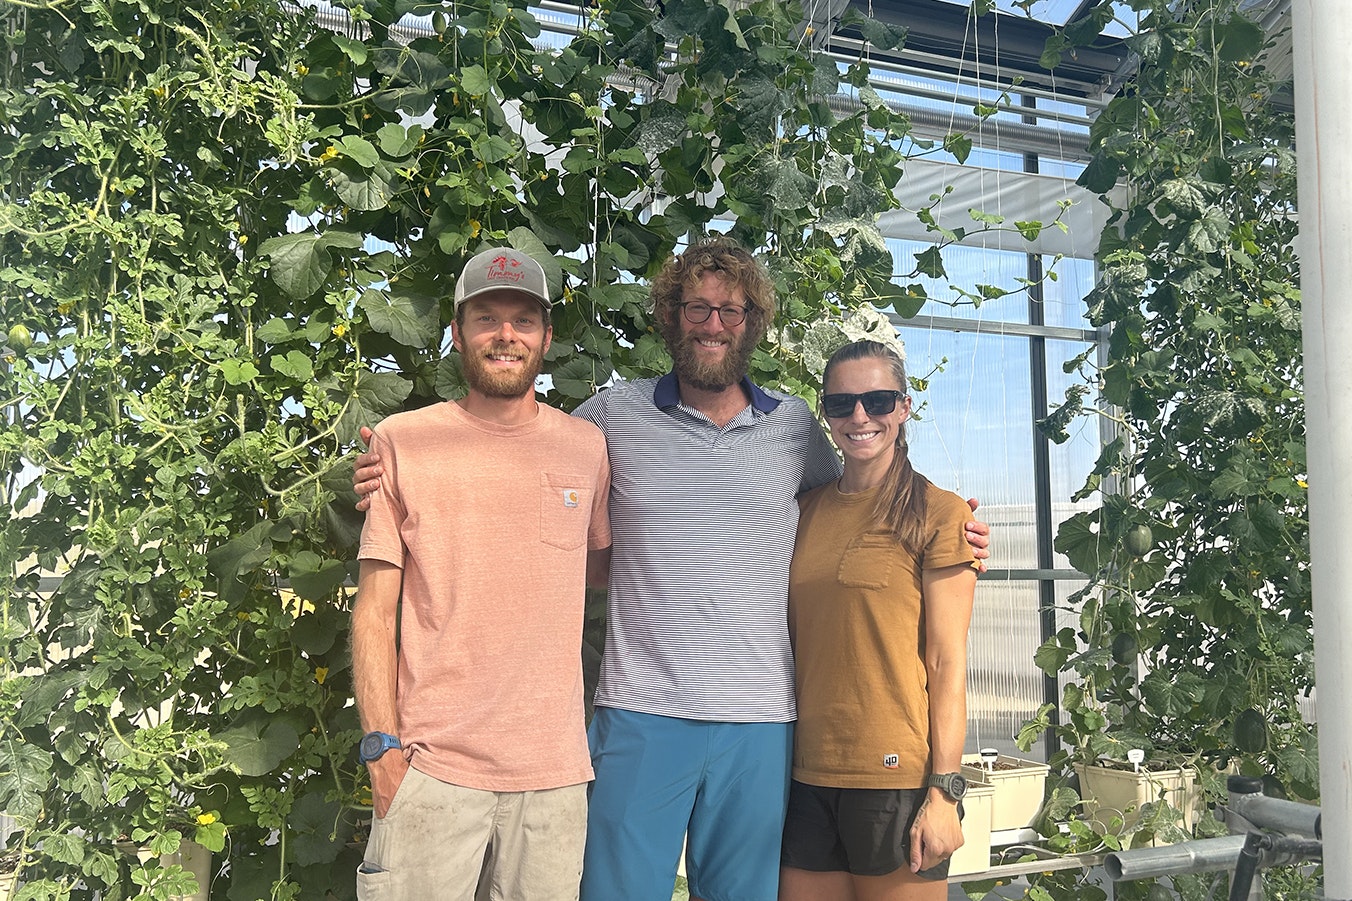 Left to right, John “Coop” Cooper, Dakin Sloss and LeAnn Cooper. Sloss is an entrepreneur who financed the Satchitanada Ranch, a state-of-the-art greenhouse in Sublette County. The Coopers run the greenhouse.